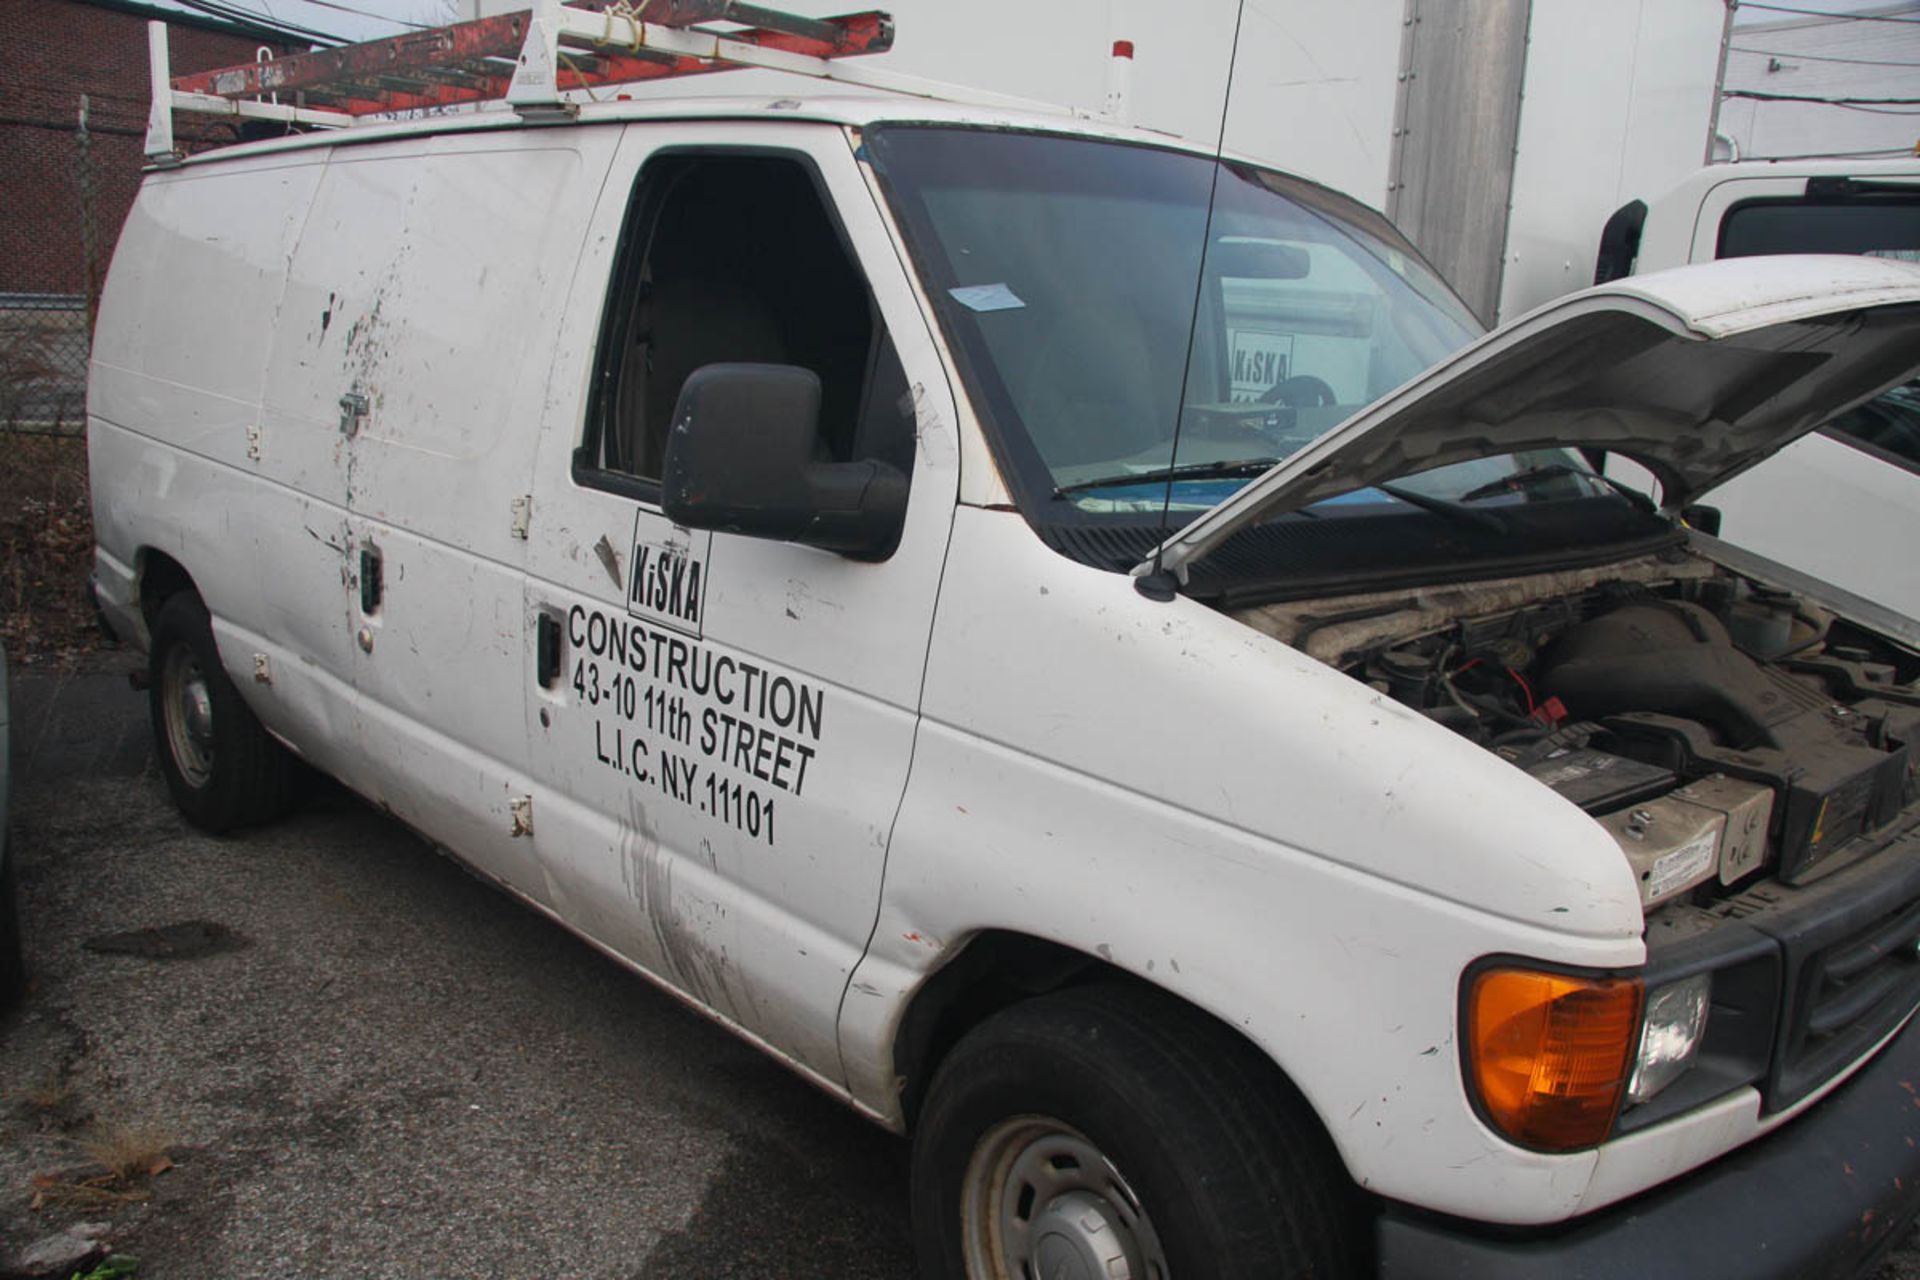 2006 FORD E-150 PANEL VAN, AUTOMATIC, APPROXIMATELY 68,506 MILES, VIN: 1FTRE14W4GDA37079 (#51) [ - Image 3 of 7